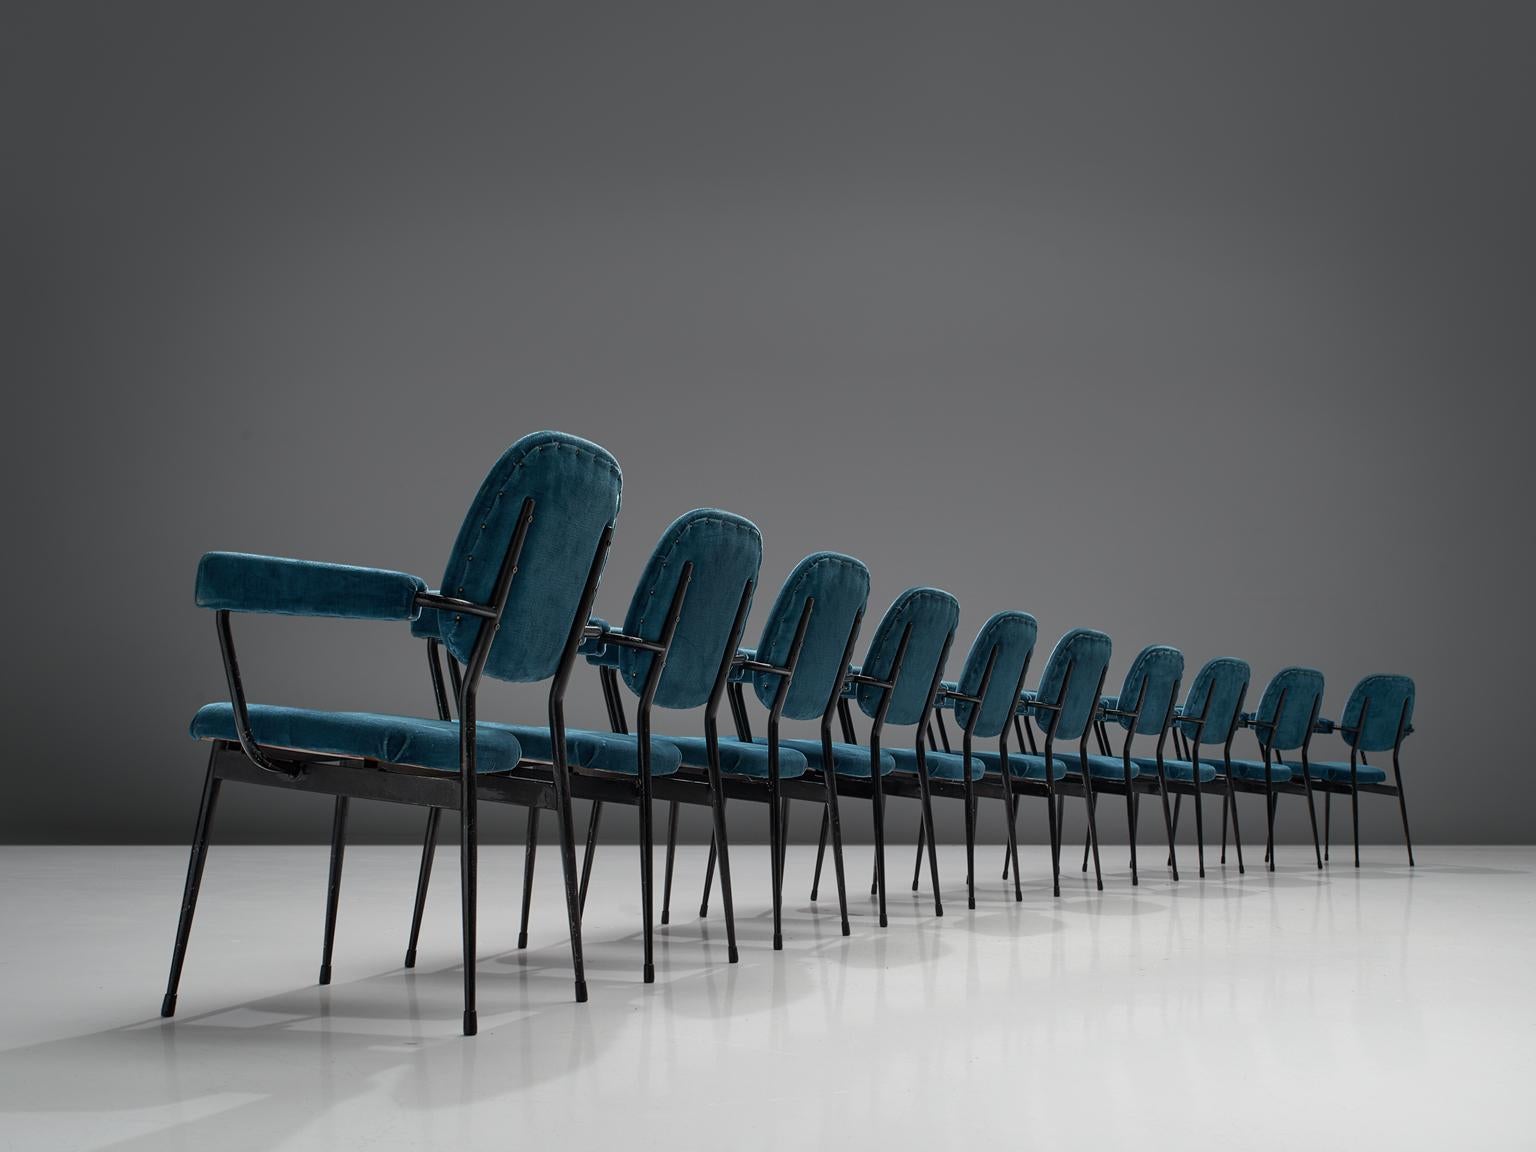 Set of 12 chairs, blue velvet, metal, Italy, 1950s

These 12 chairs with varnished metal rod structure are upholstered with blue velvet leatherette. The chairs are delicate and slender yet strong in their construction. The armrests are upholstered